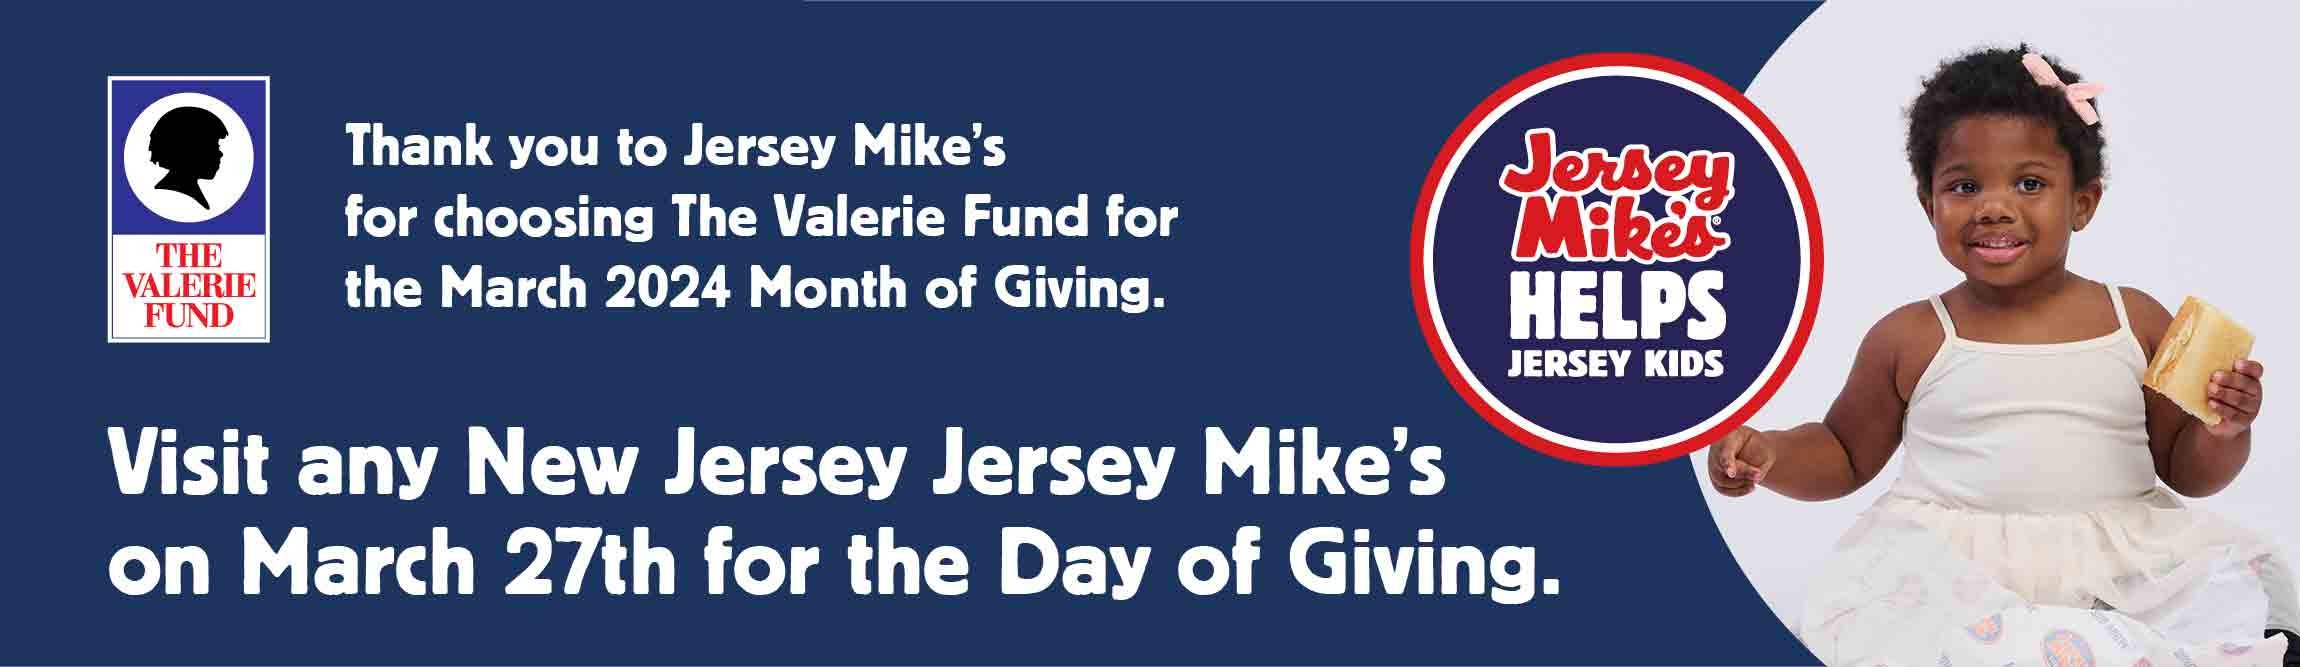 VF_Jersey-Mikes-Helps-banners-2024_v4_552x160